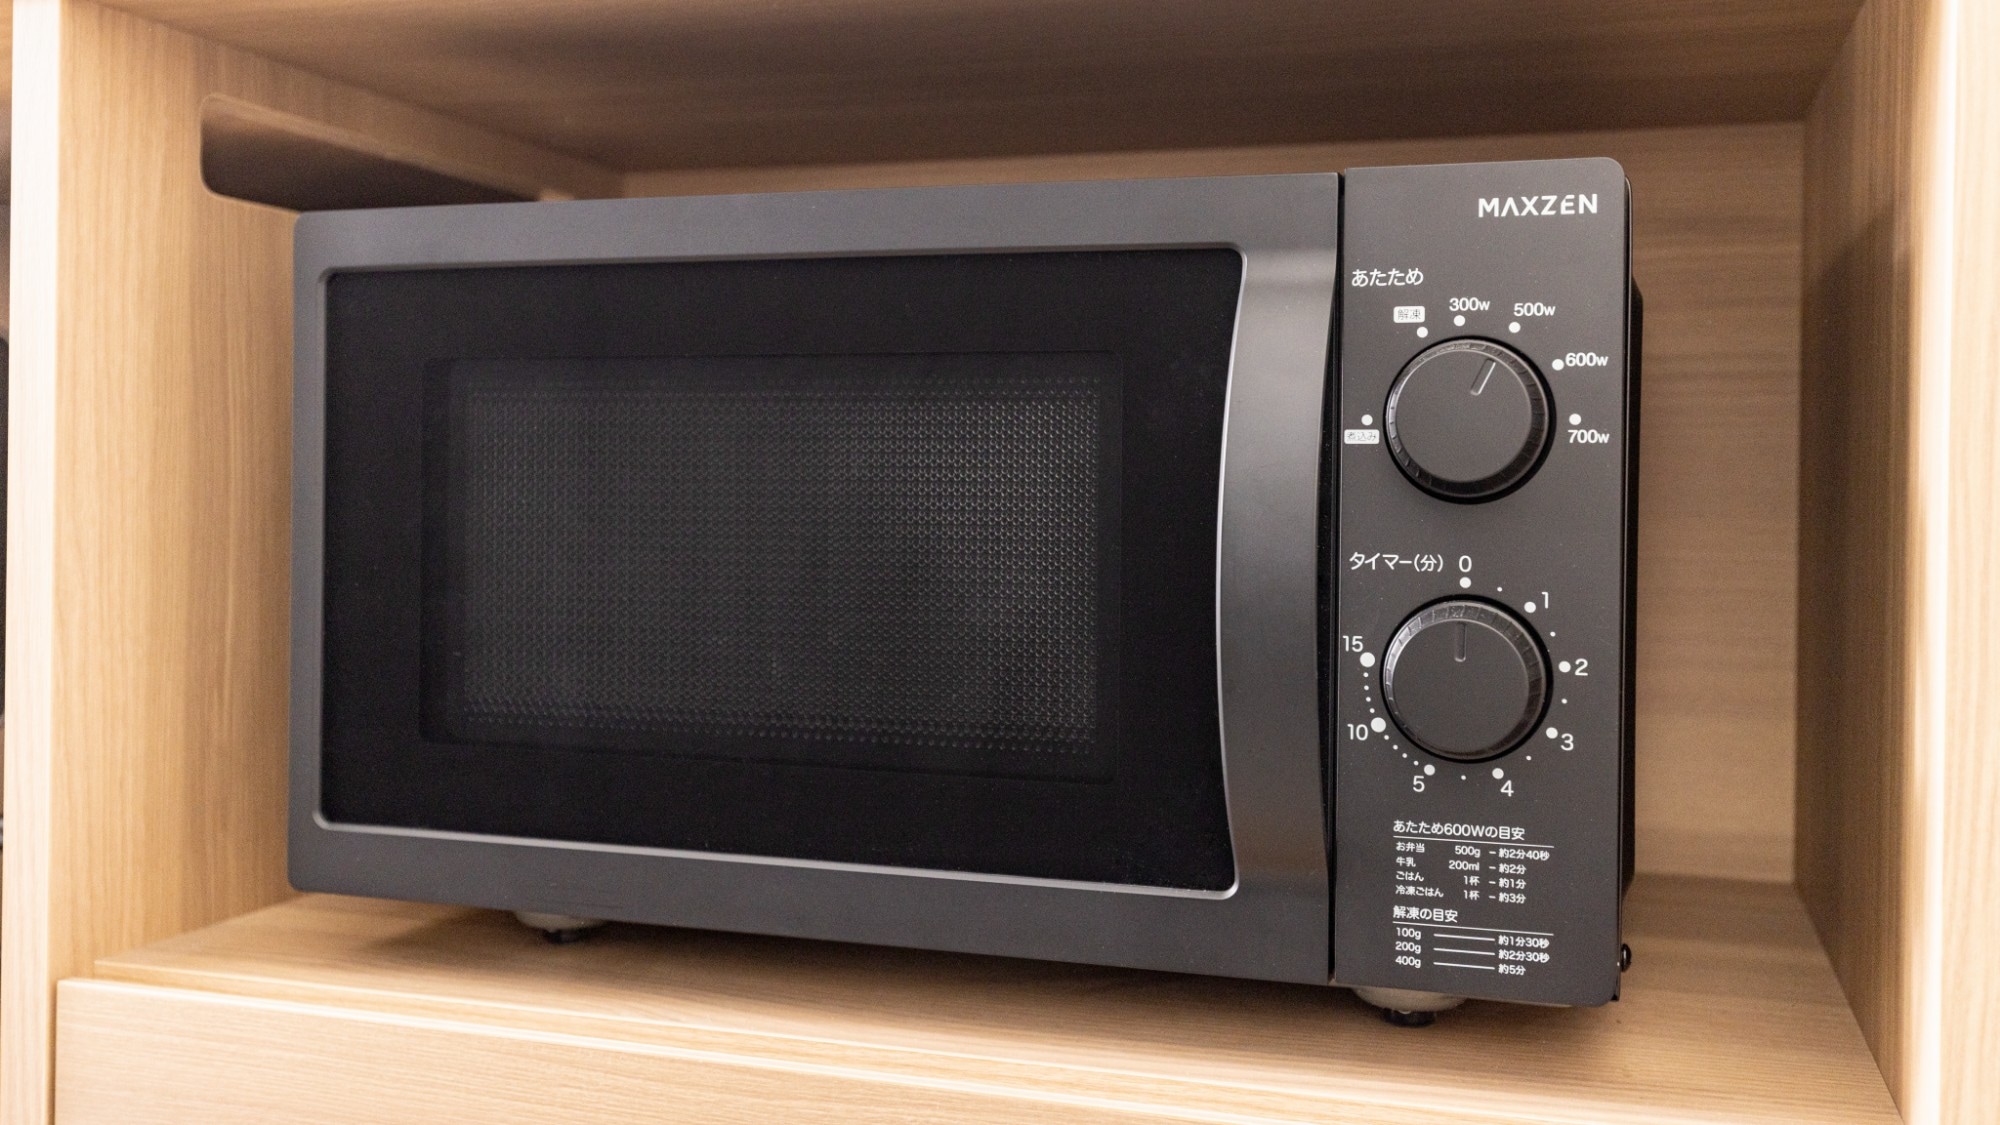 Microwave oven *Image is for illustrative purposes only